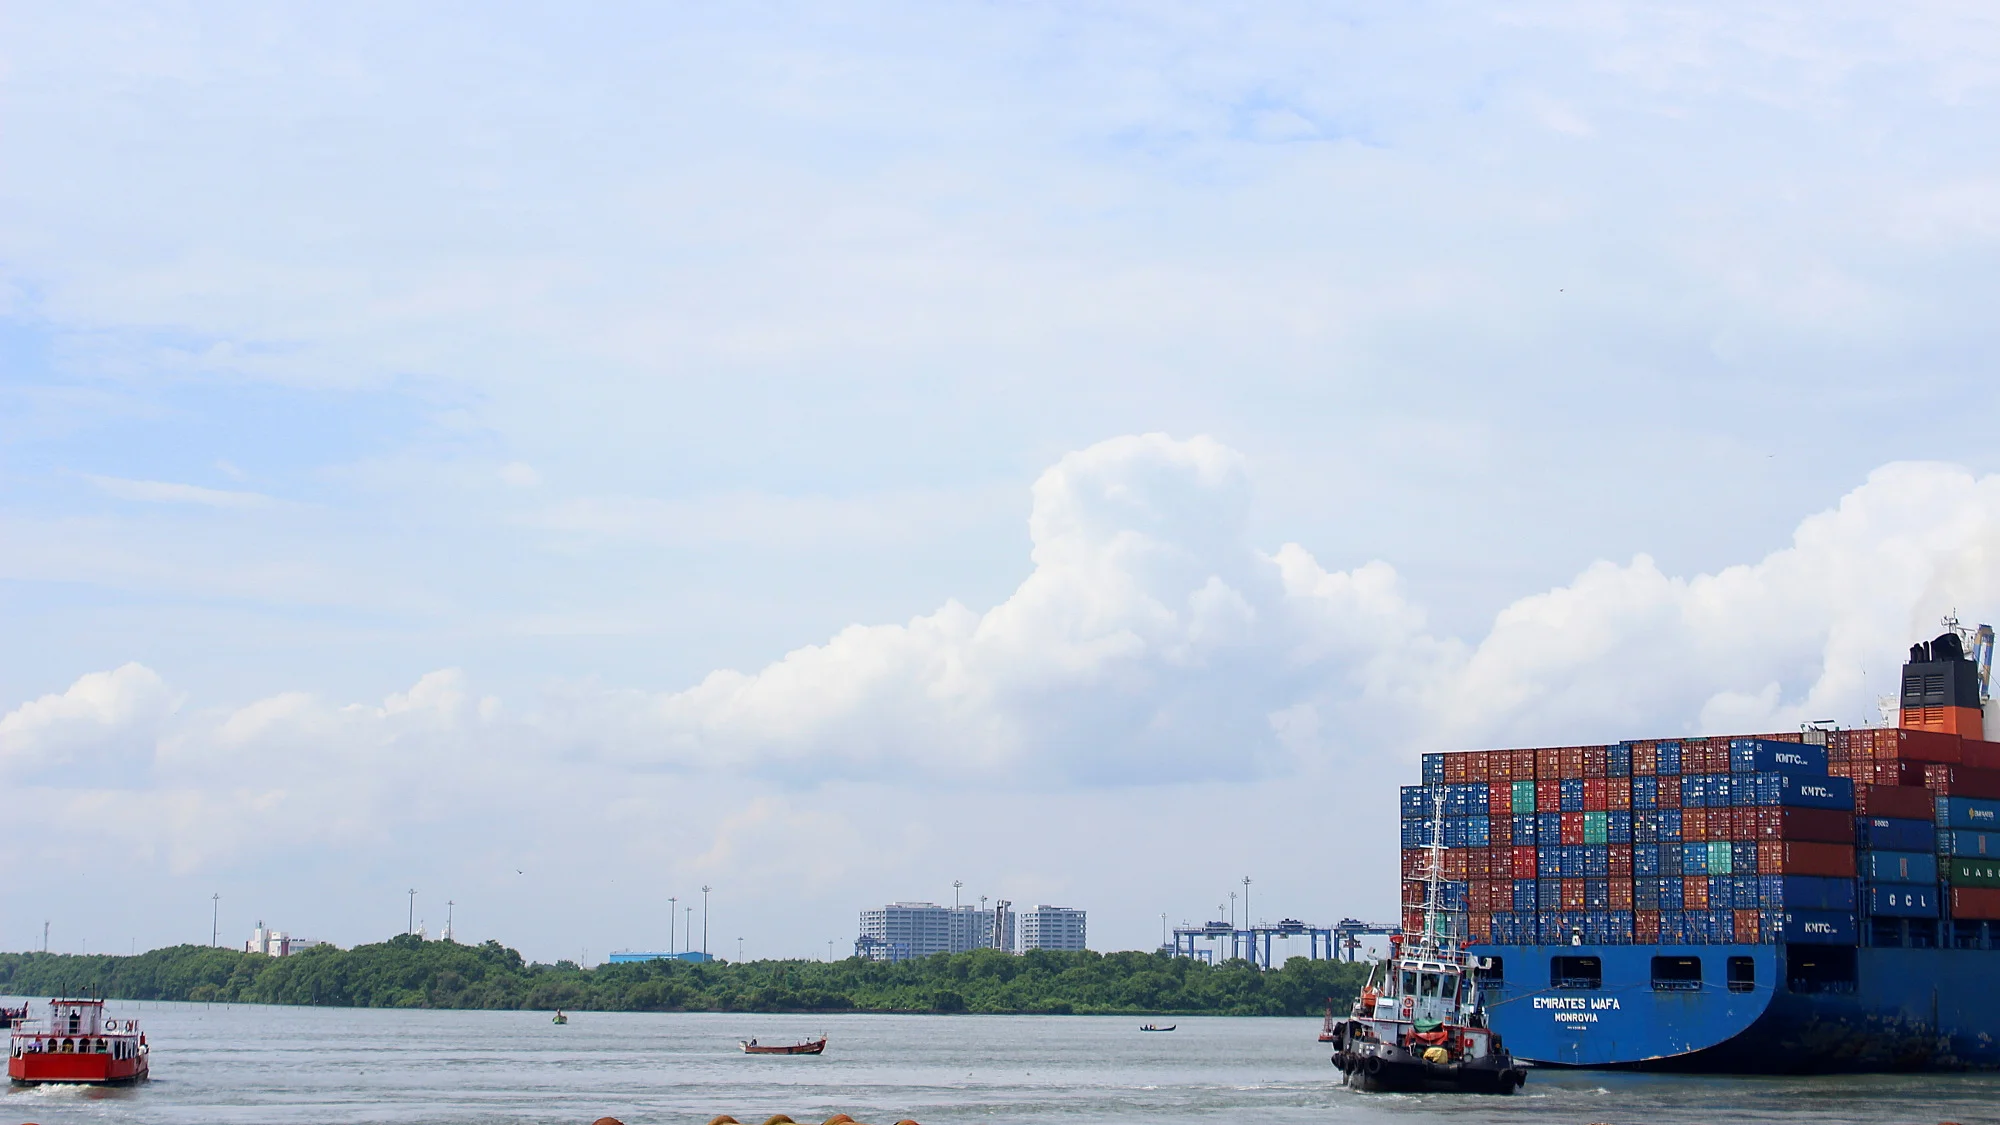 A massive cargo ship disappearing from the frame at the sea in front of Fort Kochi.